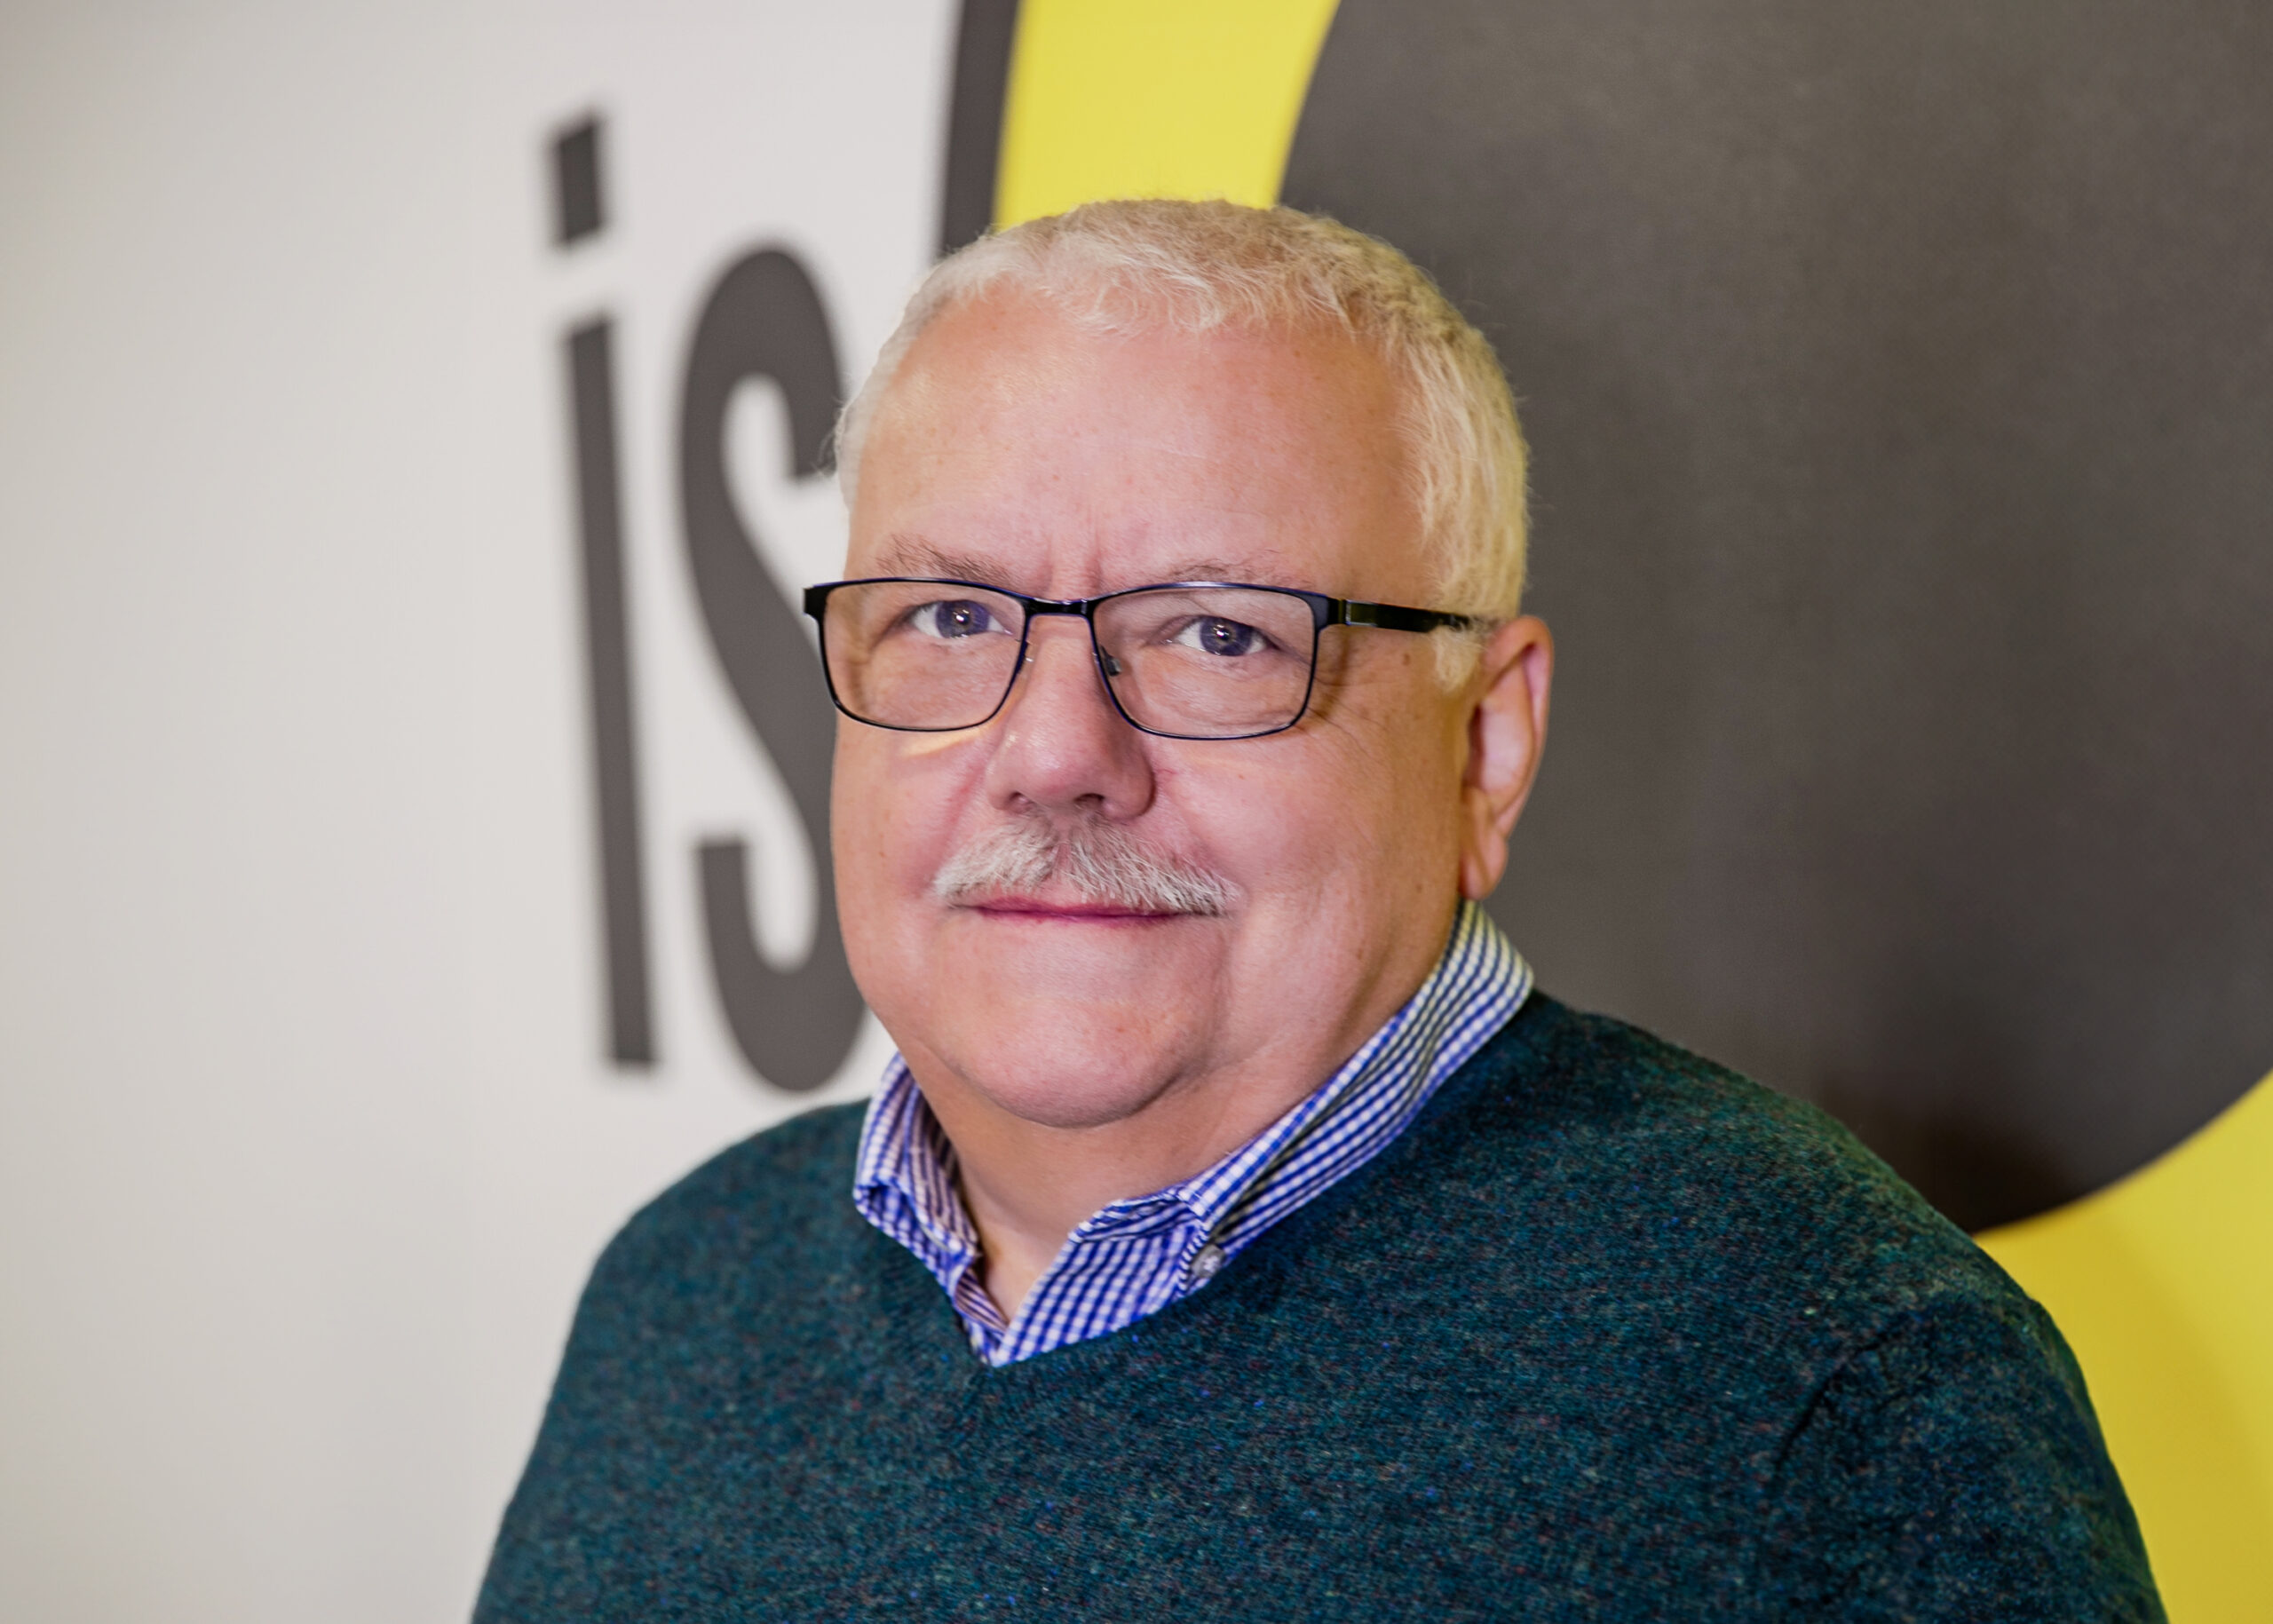 ISOPLUS UK Secures the Services of Sandy Fairley as Business Development Manager